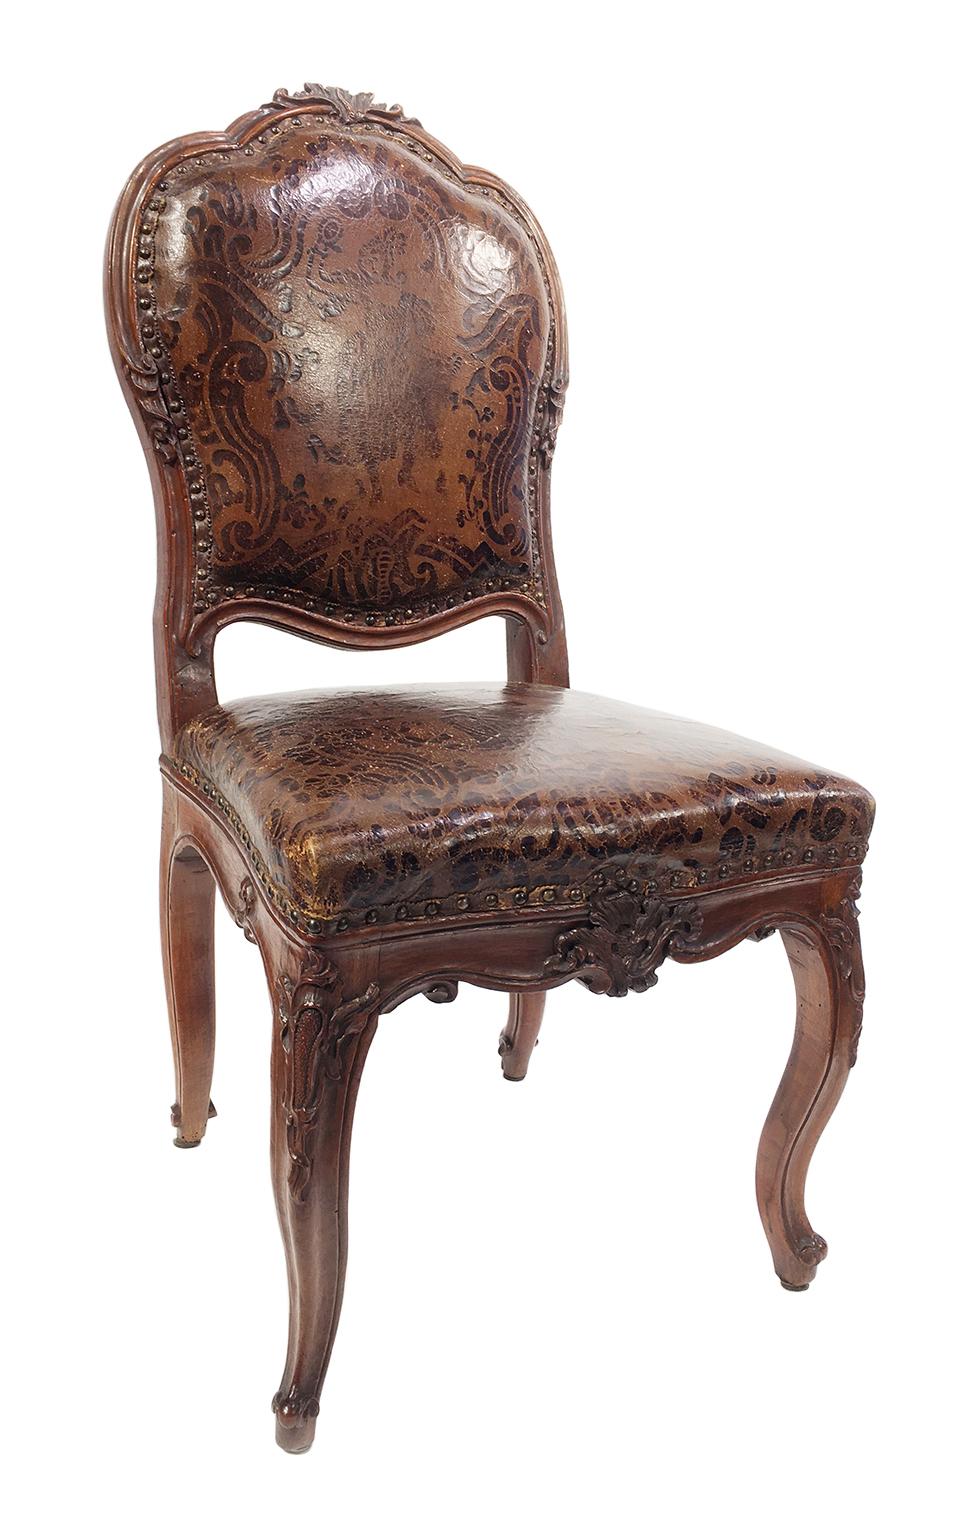 Rococo Italian Carved Walnut Chairs with Leather Covers, Milan, circa 1750 For Sale